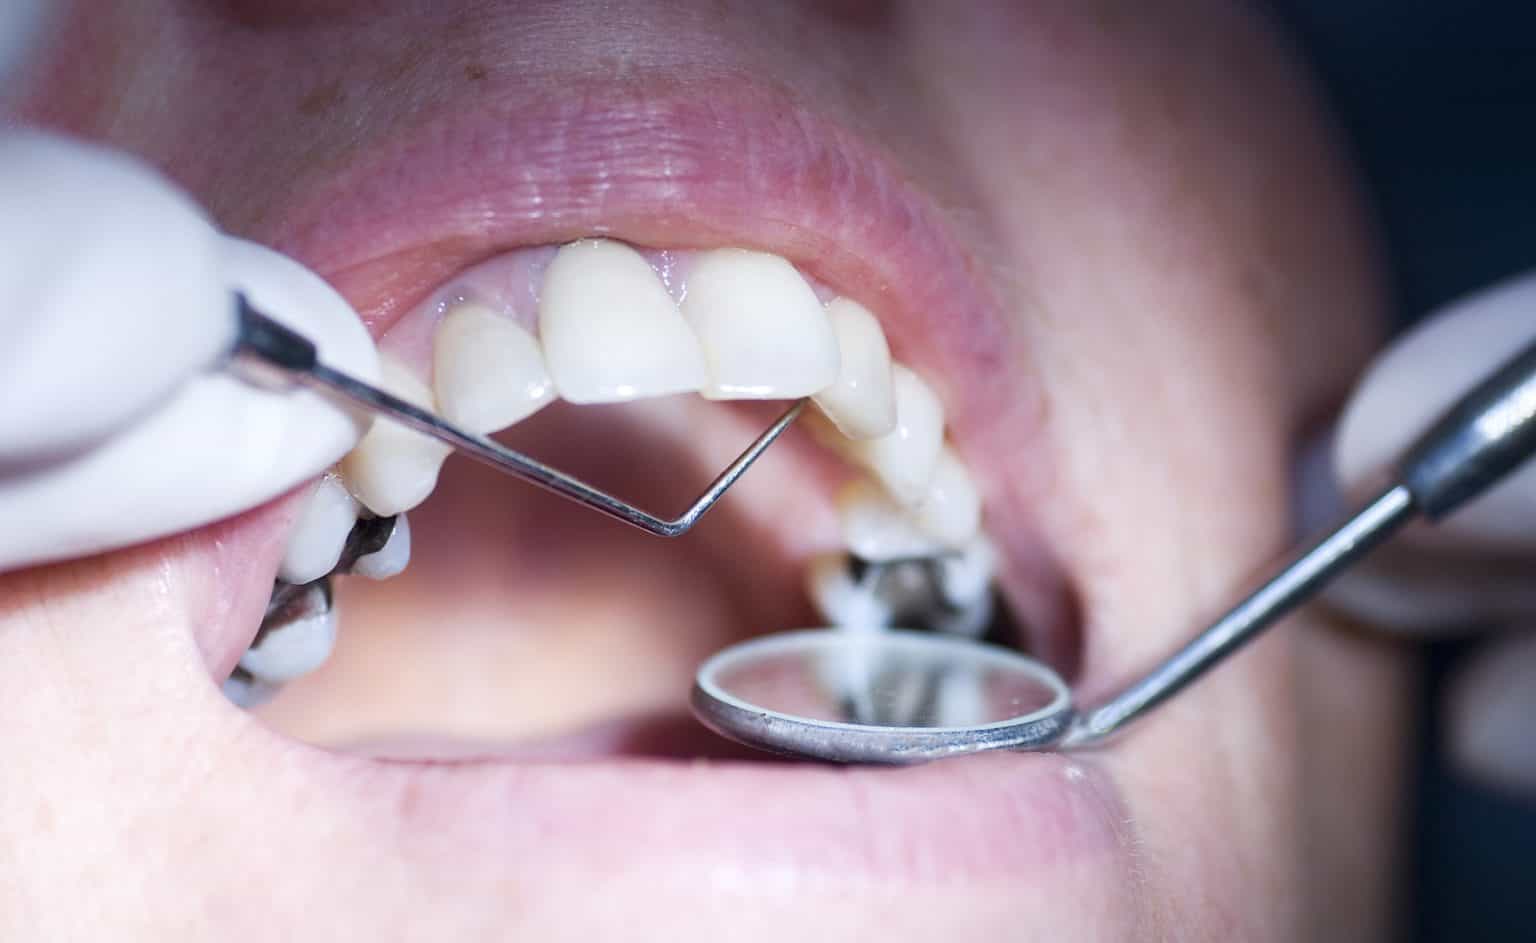 What To Do If a Temporary Dental Filling Falls Out